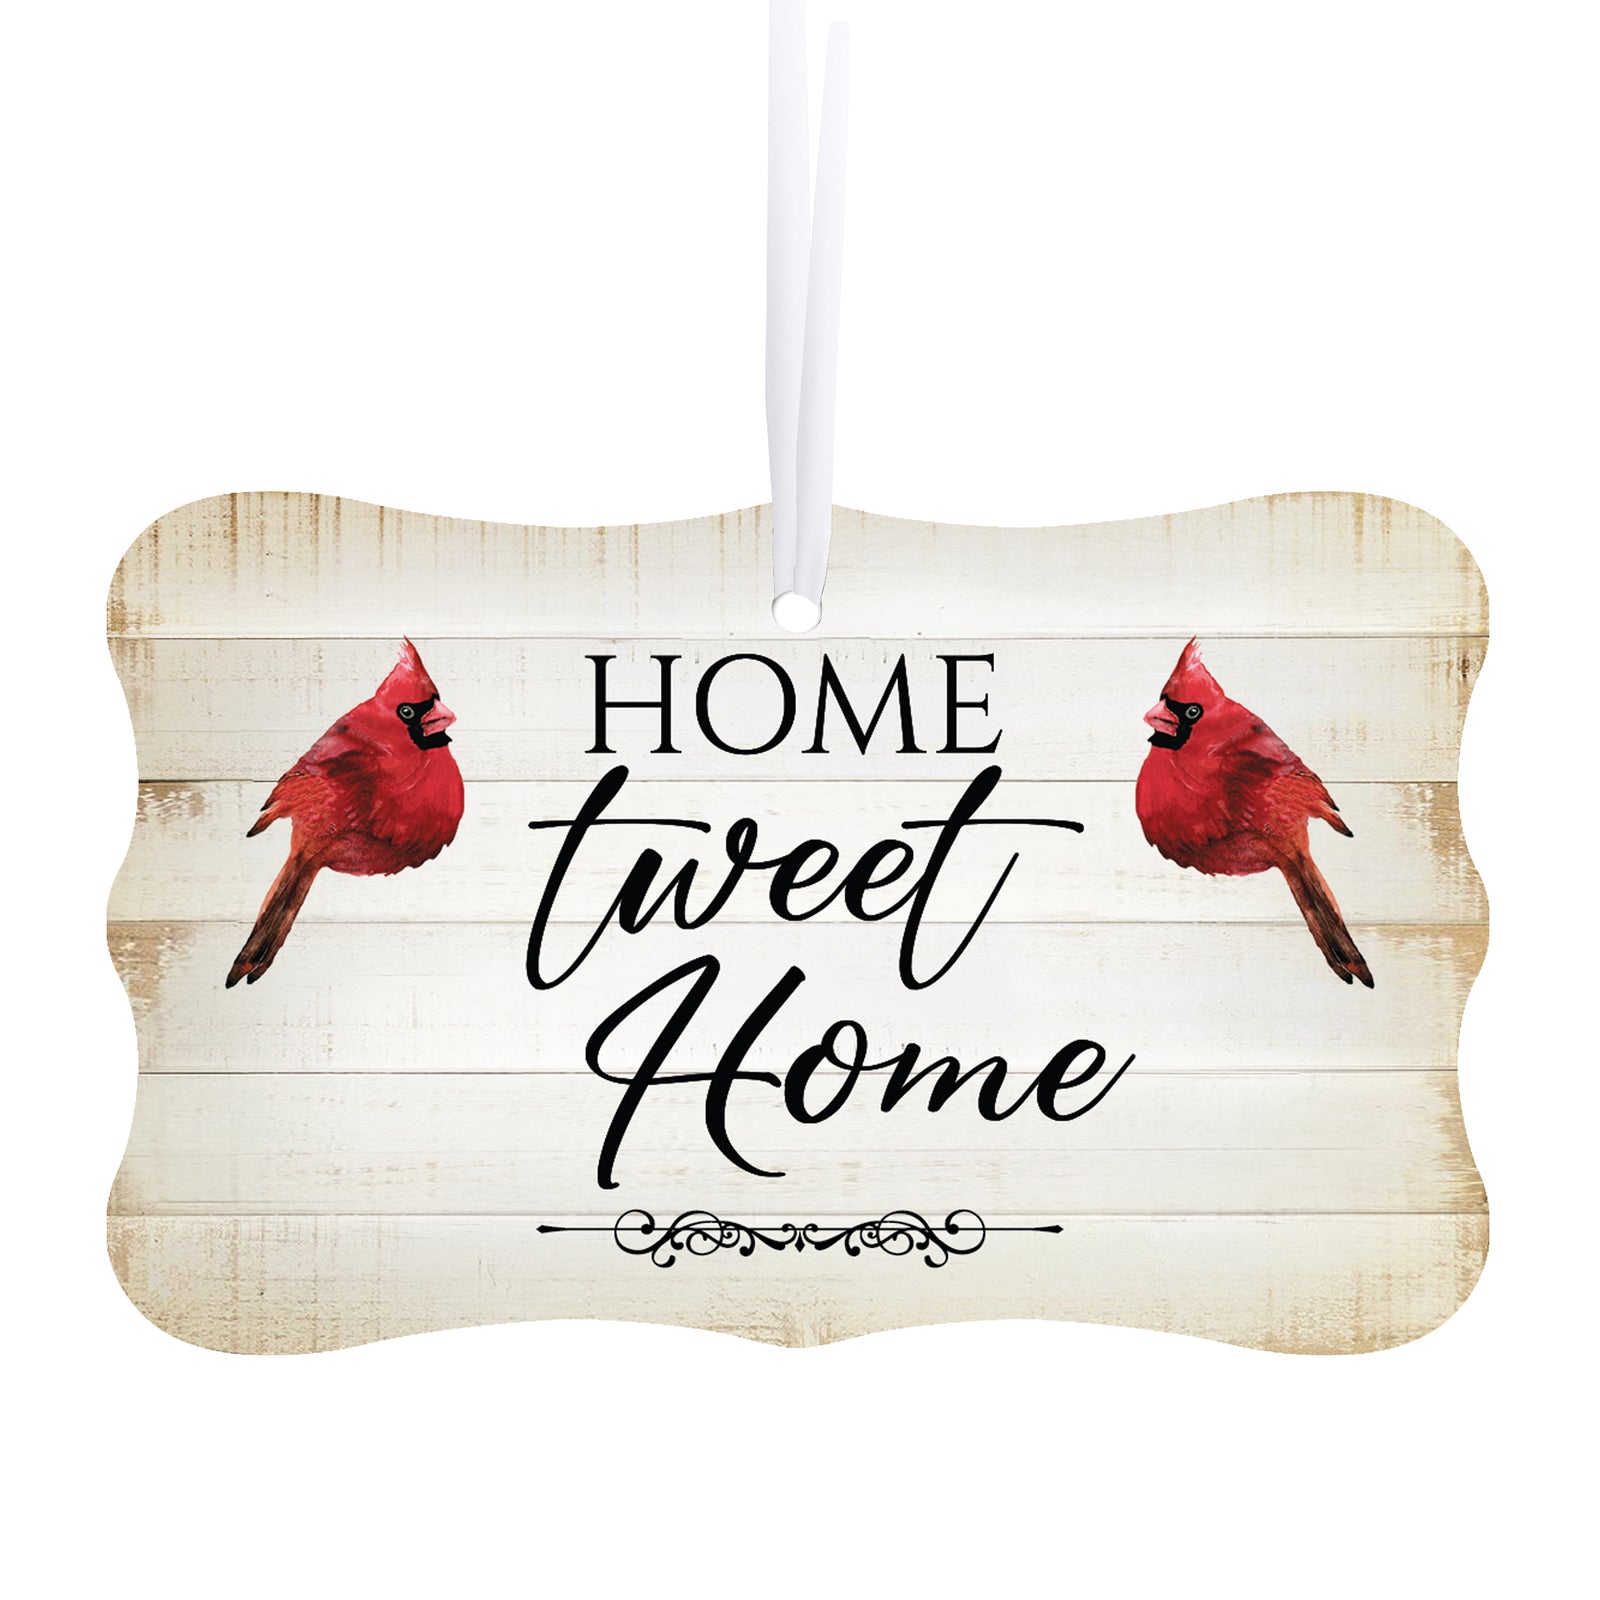 Rustic Scalloped Cardinal Wooden Ornament With Everyday Verses Gift Ideas - Home Tweet Home